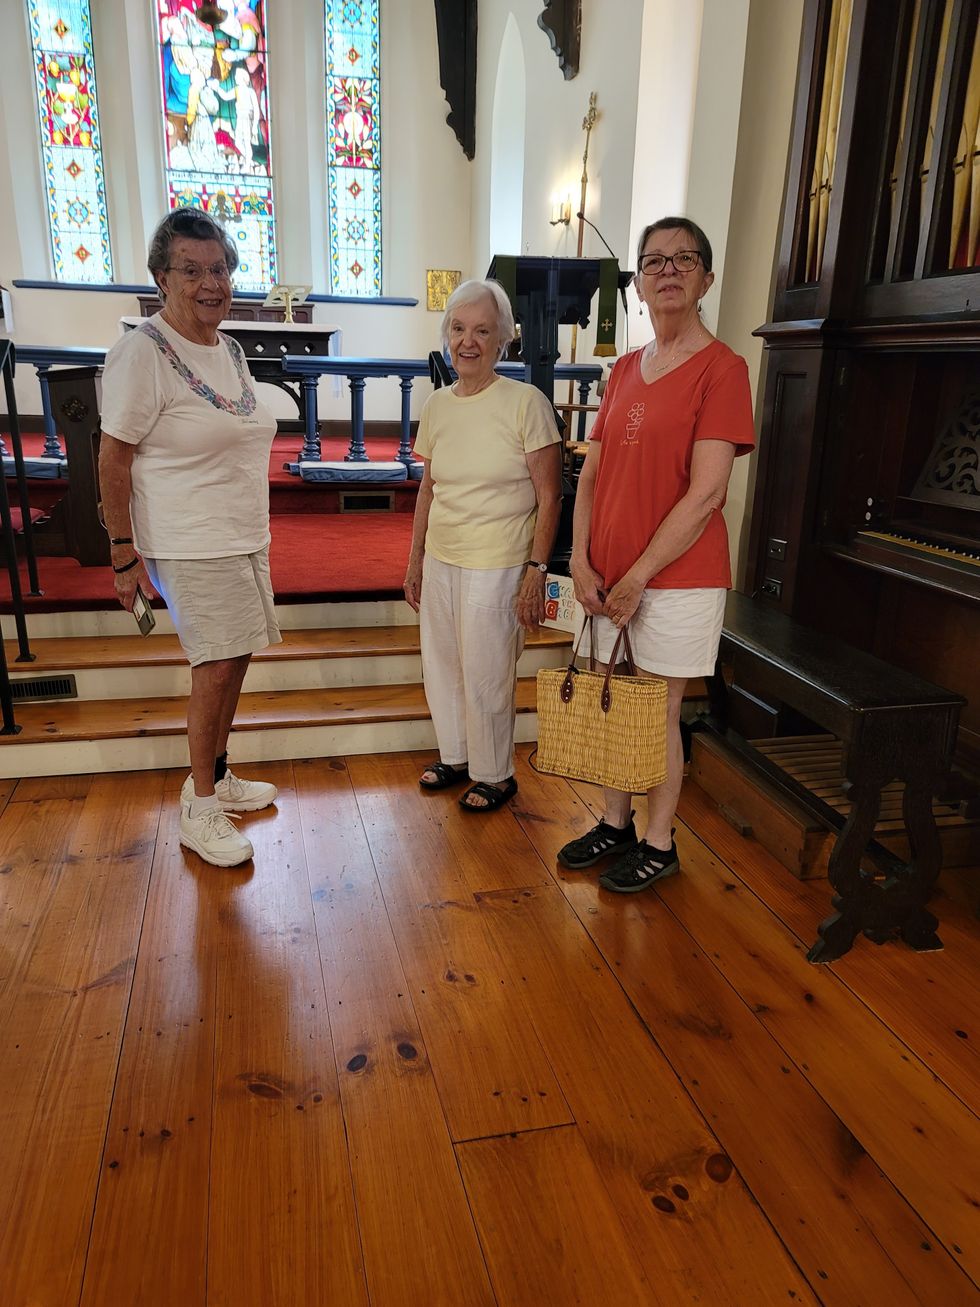 St. Thomas shares history with visitors